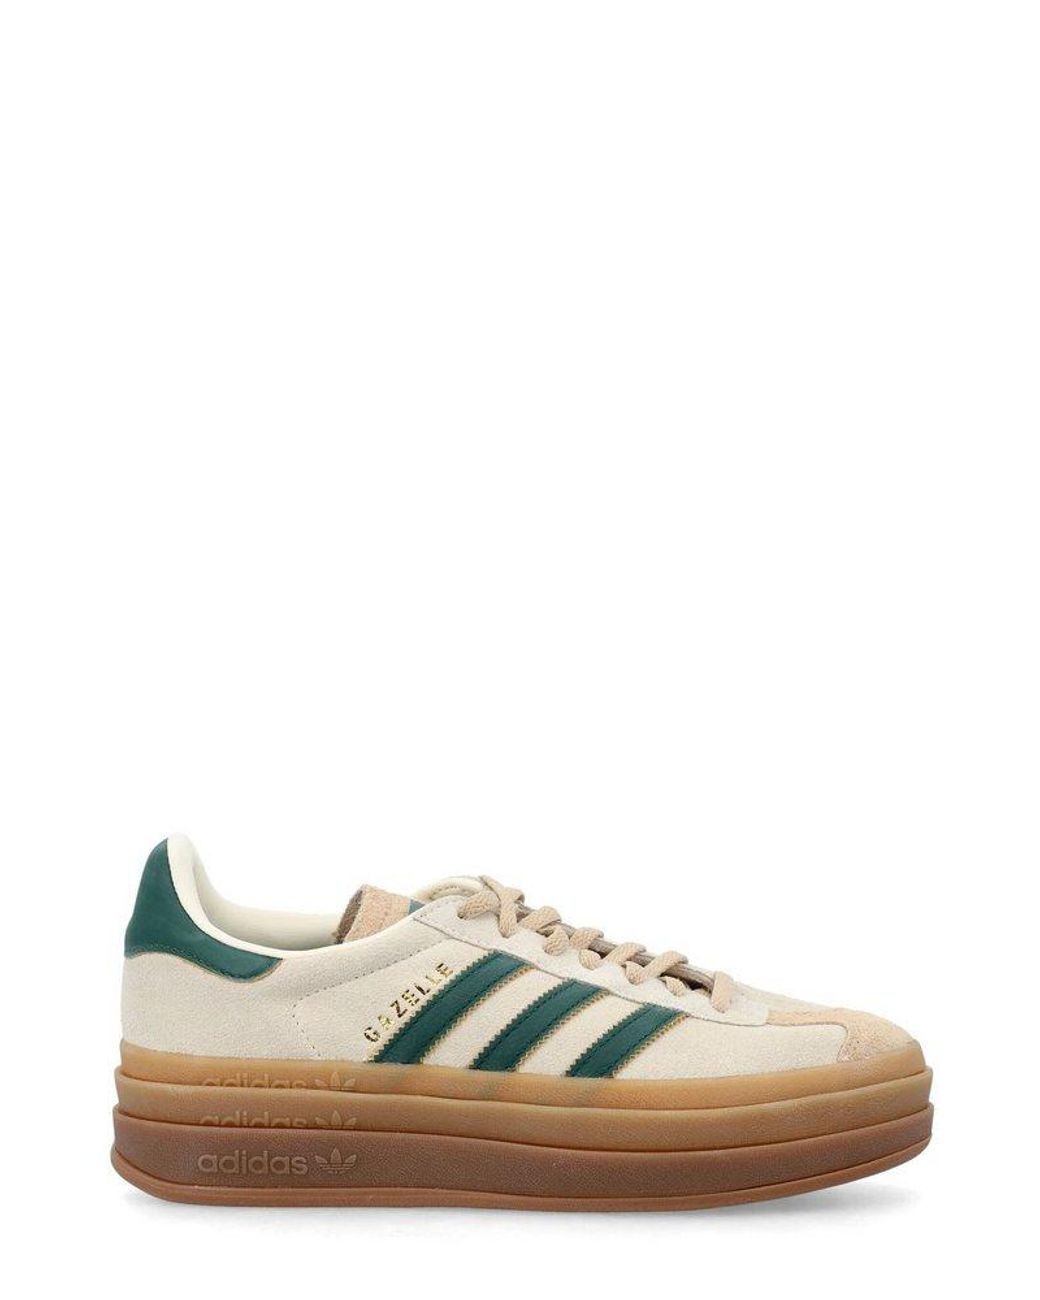 adidas Originals Gazelle Bold Sneakers in Natural | Lyst Canada